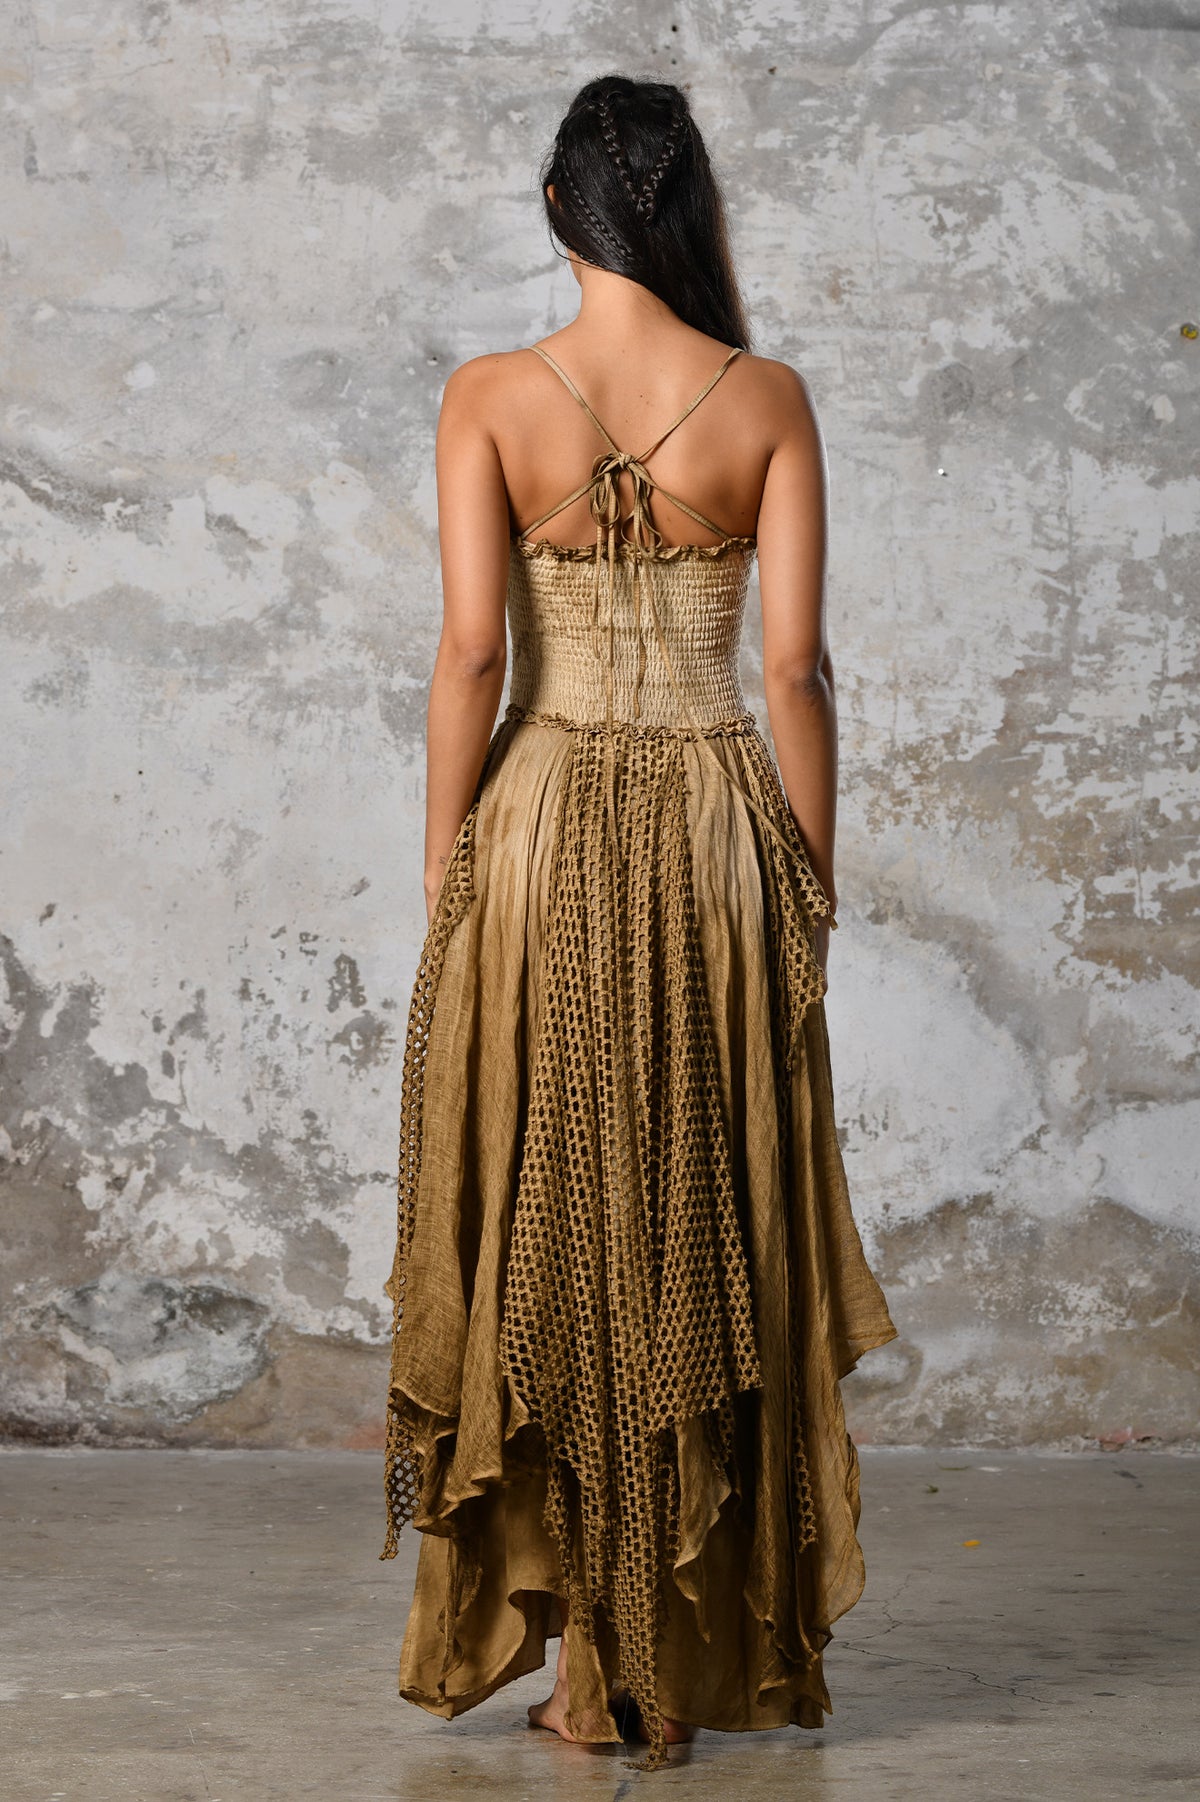 Our greek goddess dress made of handwoven organic cotton. Perfect dress for beach weddings, ceremonies and special occasions. The braids are made by hands making this dress transformer - multiway. You can tighten it up in different positions.